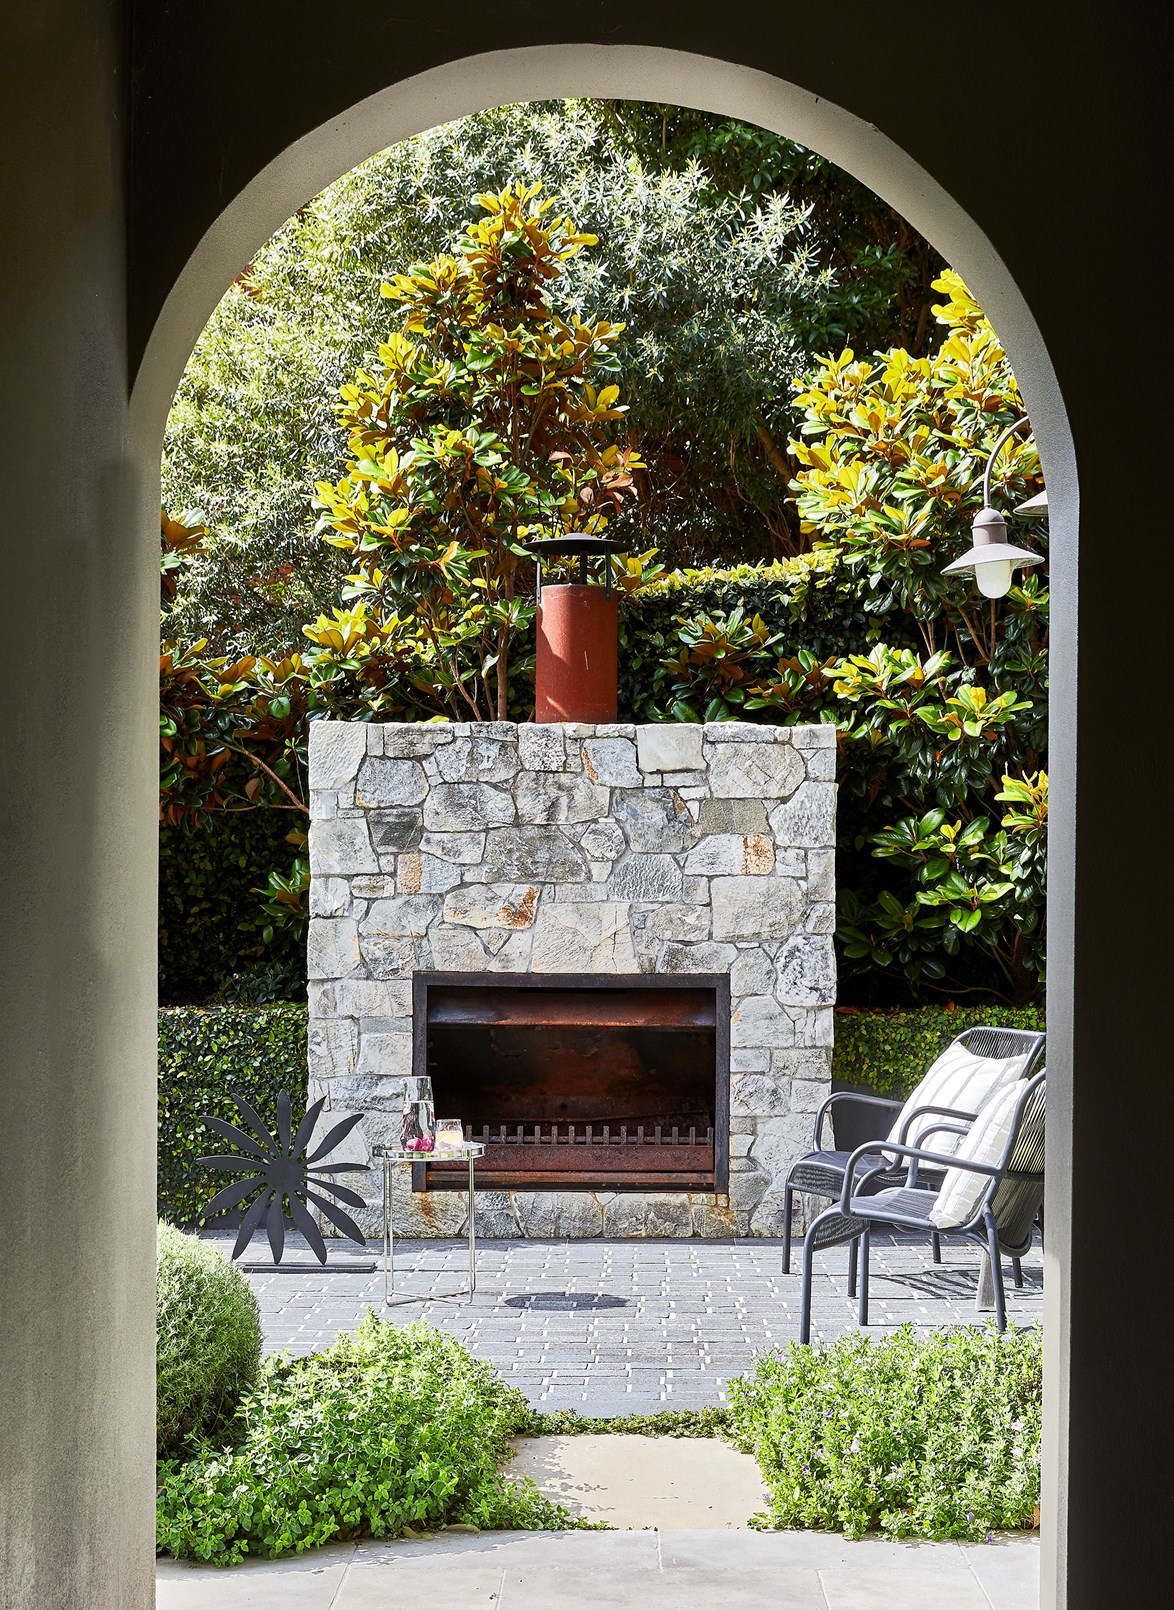 A view to relaxation with [this formally landscaped garden](https://www.homestolove.com.au/bayside-home-palazzo-design-22322|target="_blank") with a feature stone fireplace. With enough planning at the beginning of a project, or a good eye for detail down the track, vistas such as this can be created to connect the indoors with the outside to enjoy the best of both worlds.